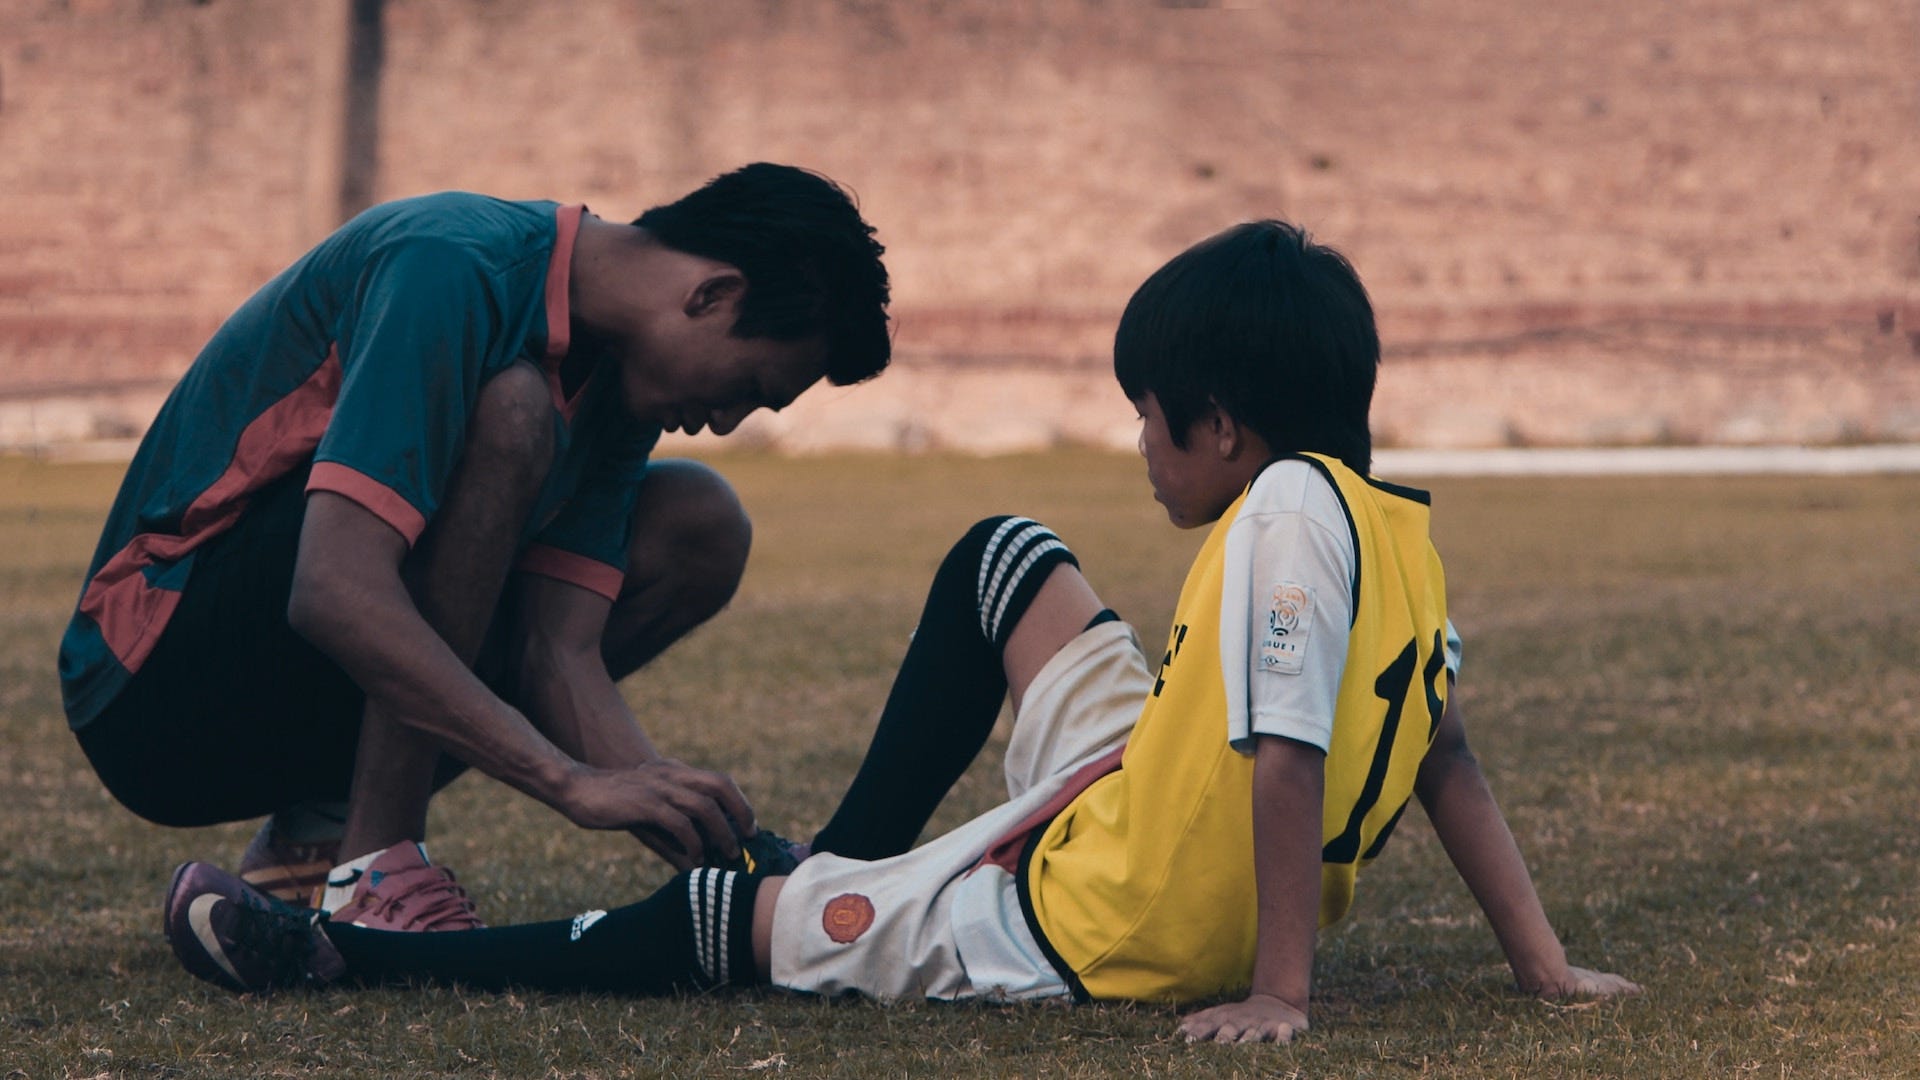 Soccer coach helping a player